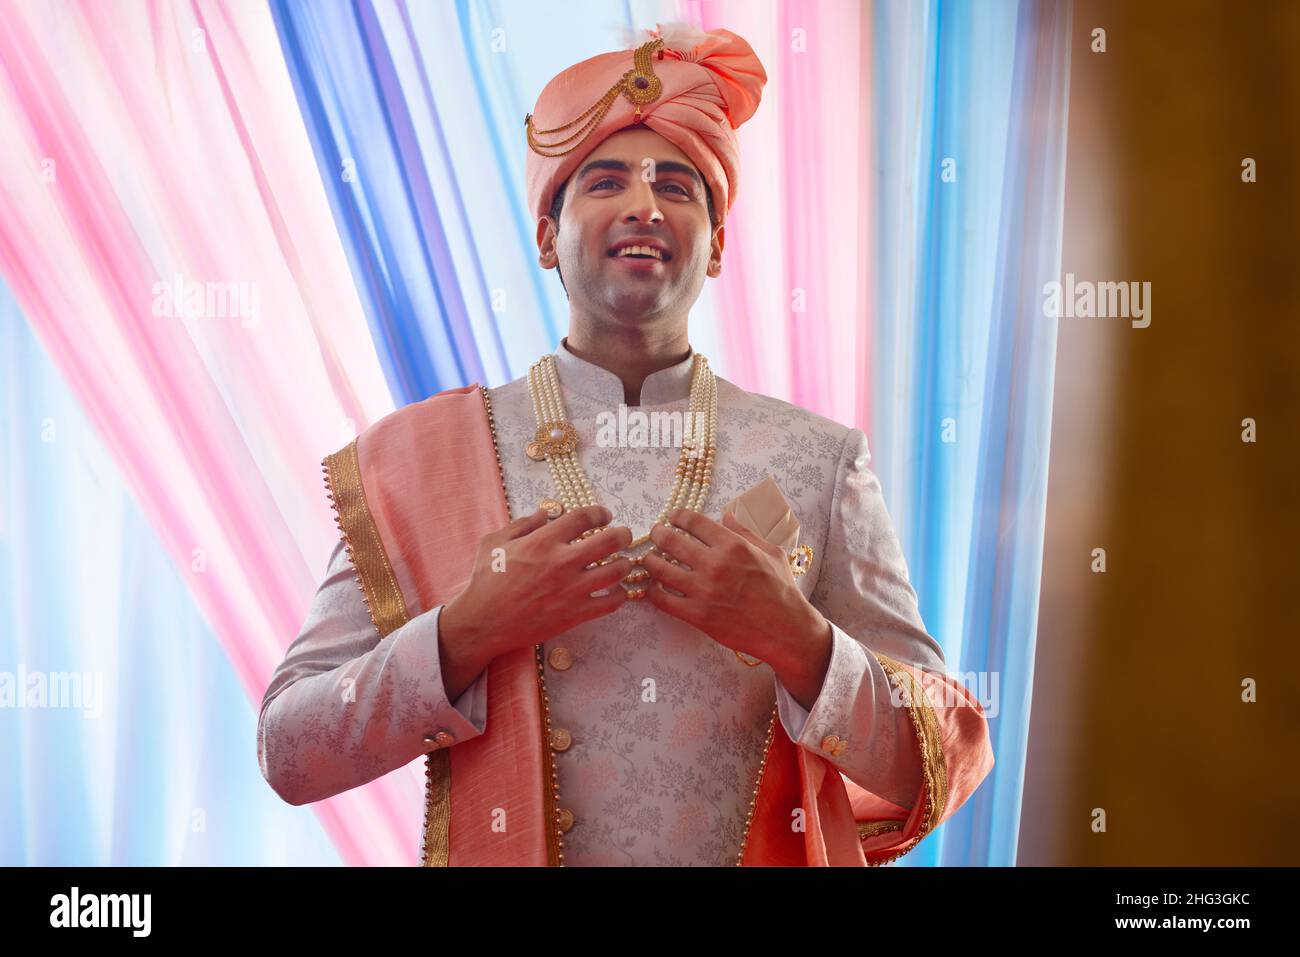 Indian groom in traditional wedding outfit Stock Photo